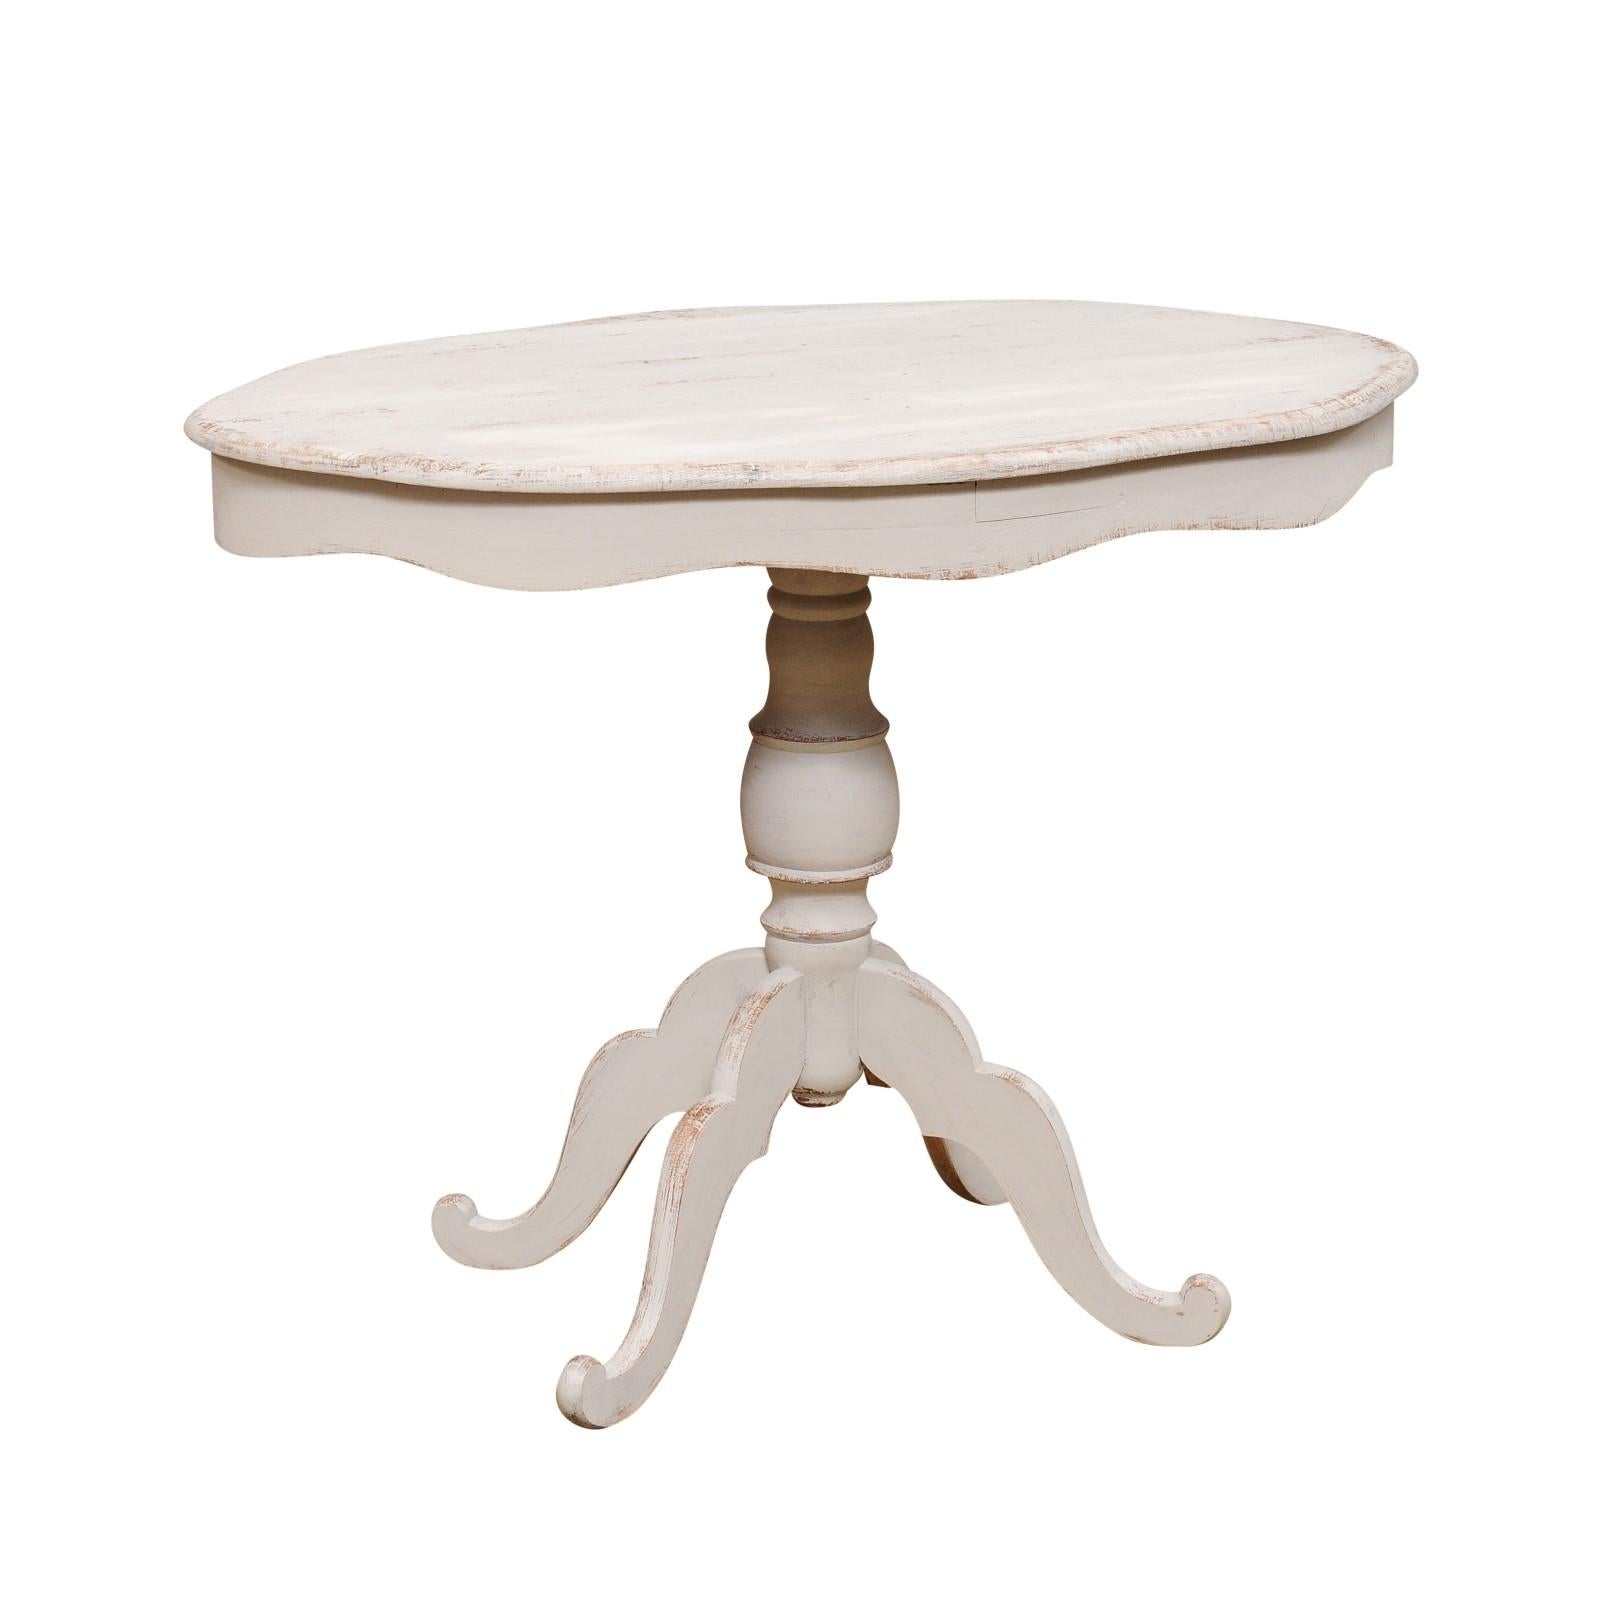 A Swedish painted wood oval top pedestal table circa 1860 with carved undulating apron, turned pedestal and quadripod base. Indulge in the allure of Scandinavian design with this charming Swedish painted wood oval top pedestal table, circa 1860. A